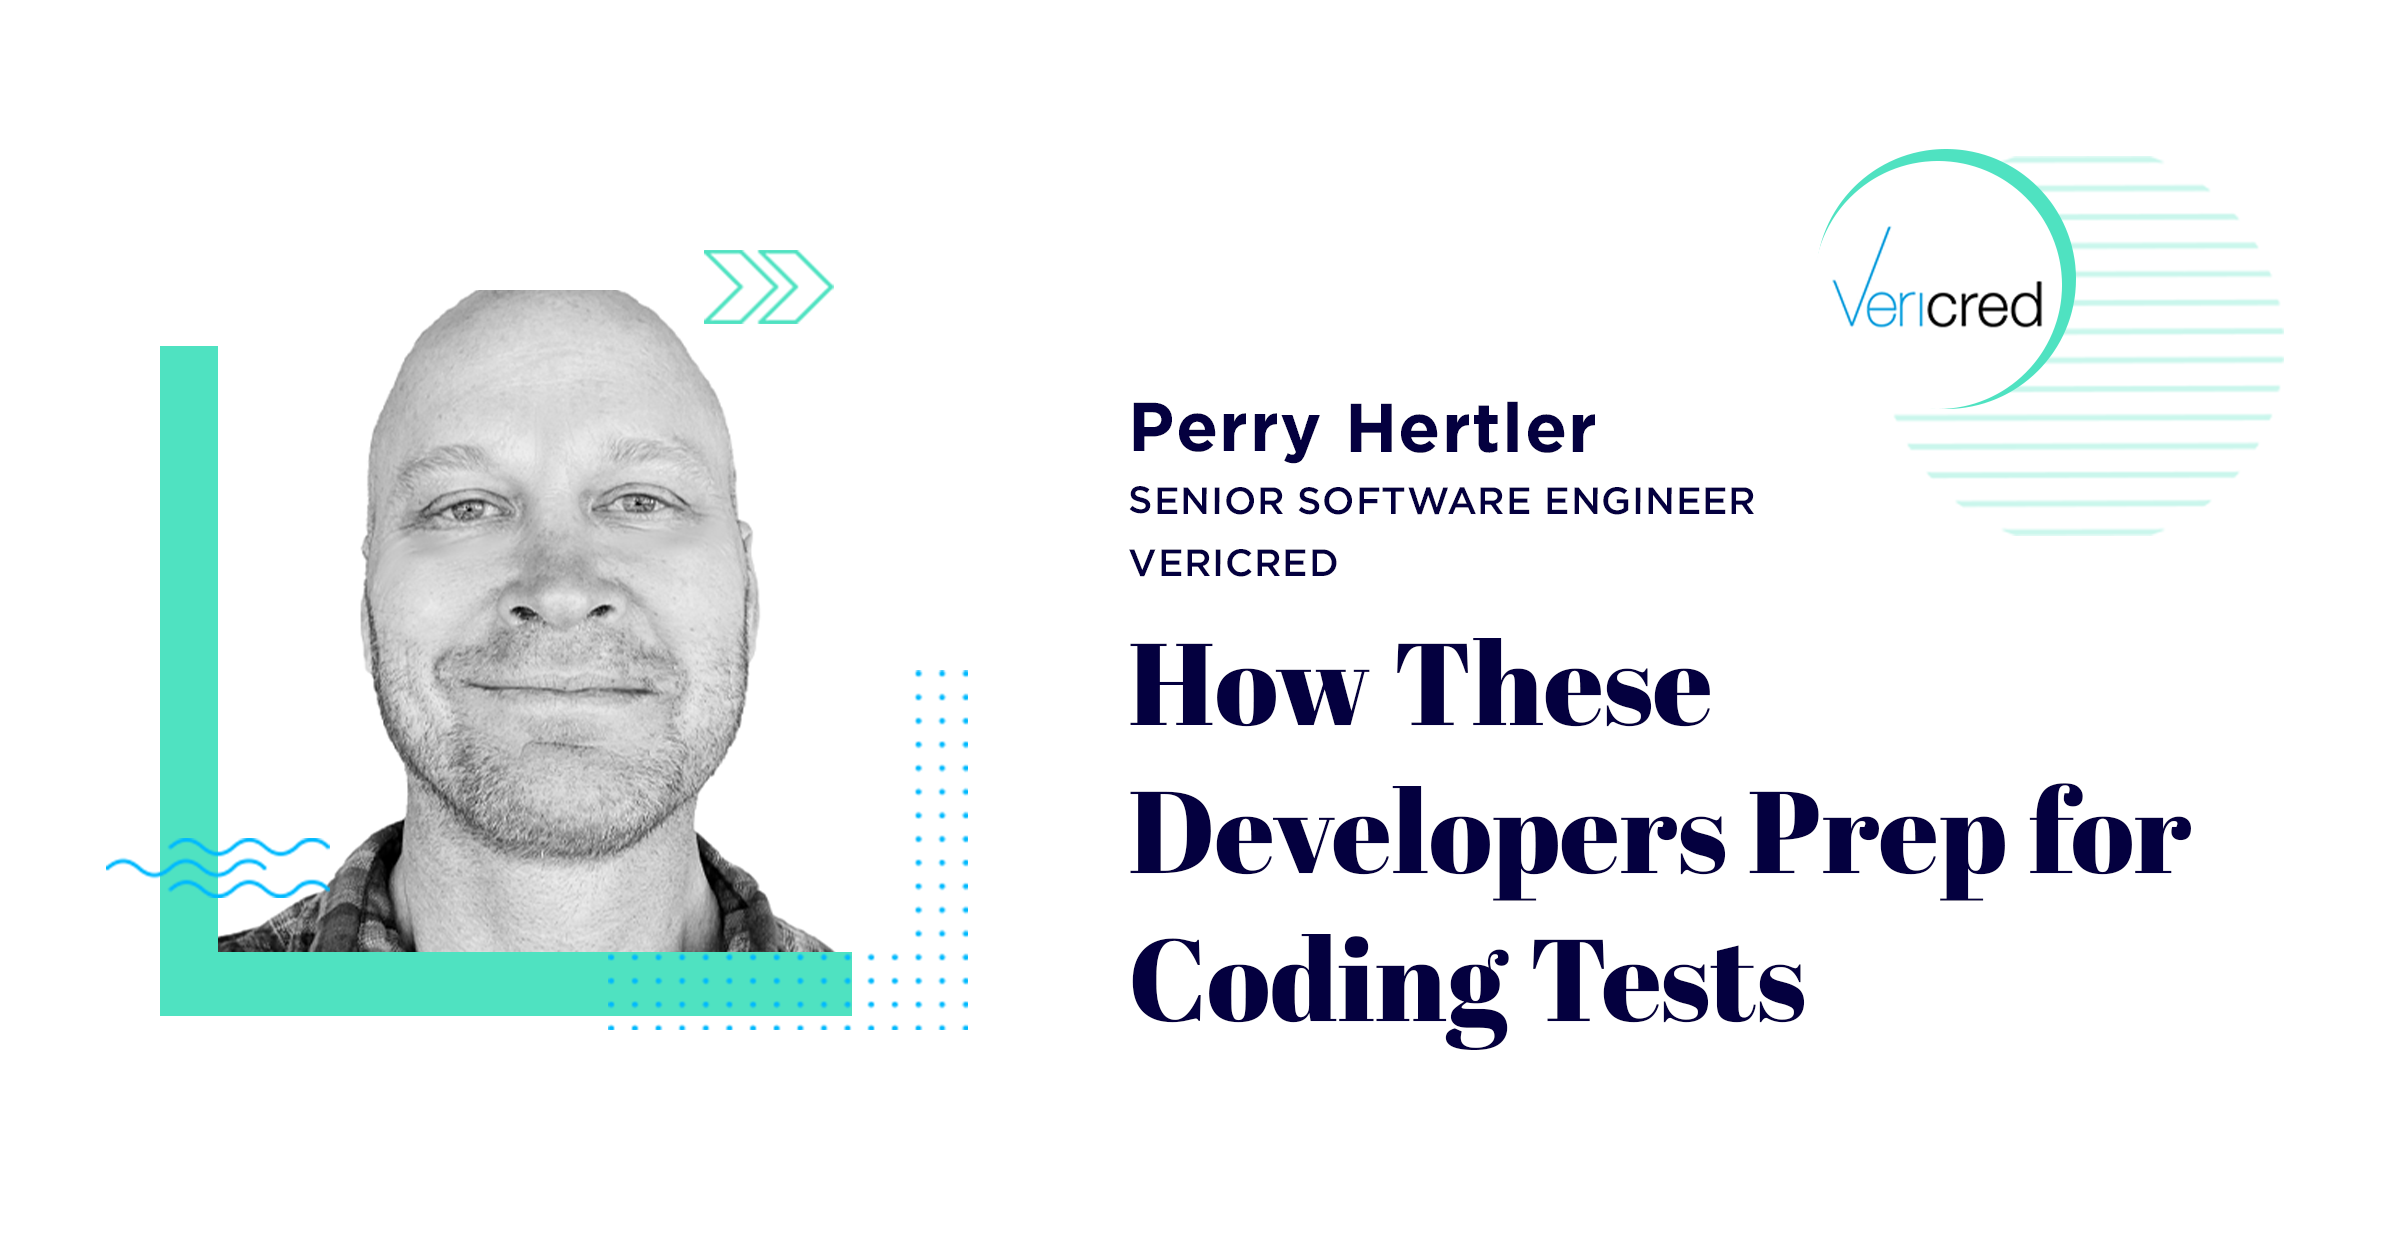 Senior Software Engineer Perry Hertler shares advice to coders in BuiltInNYC